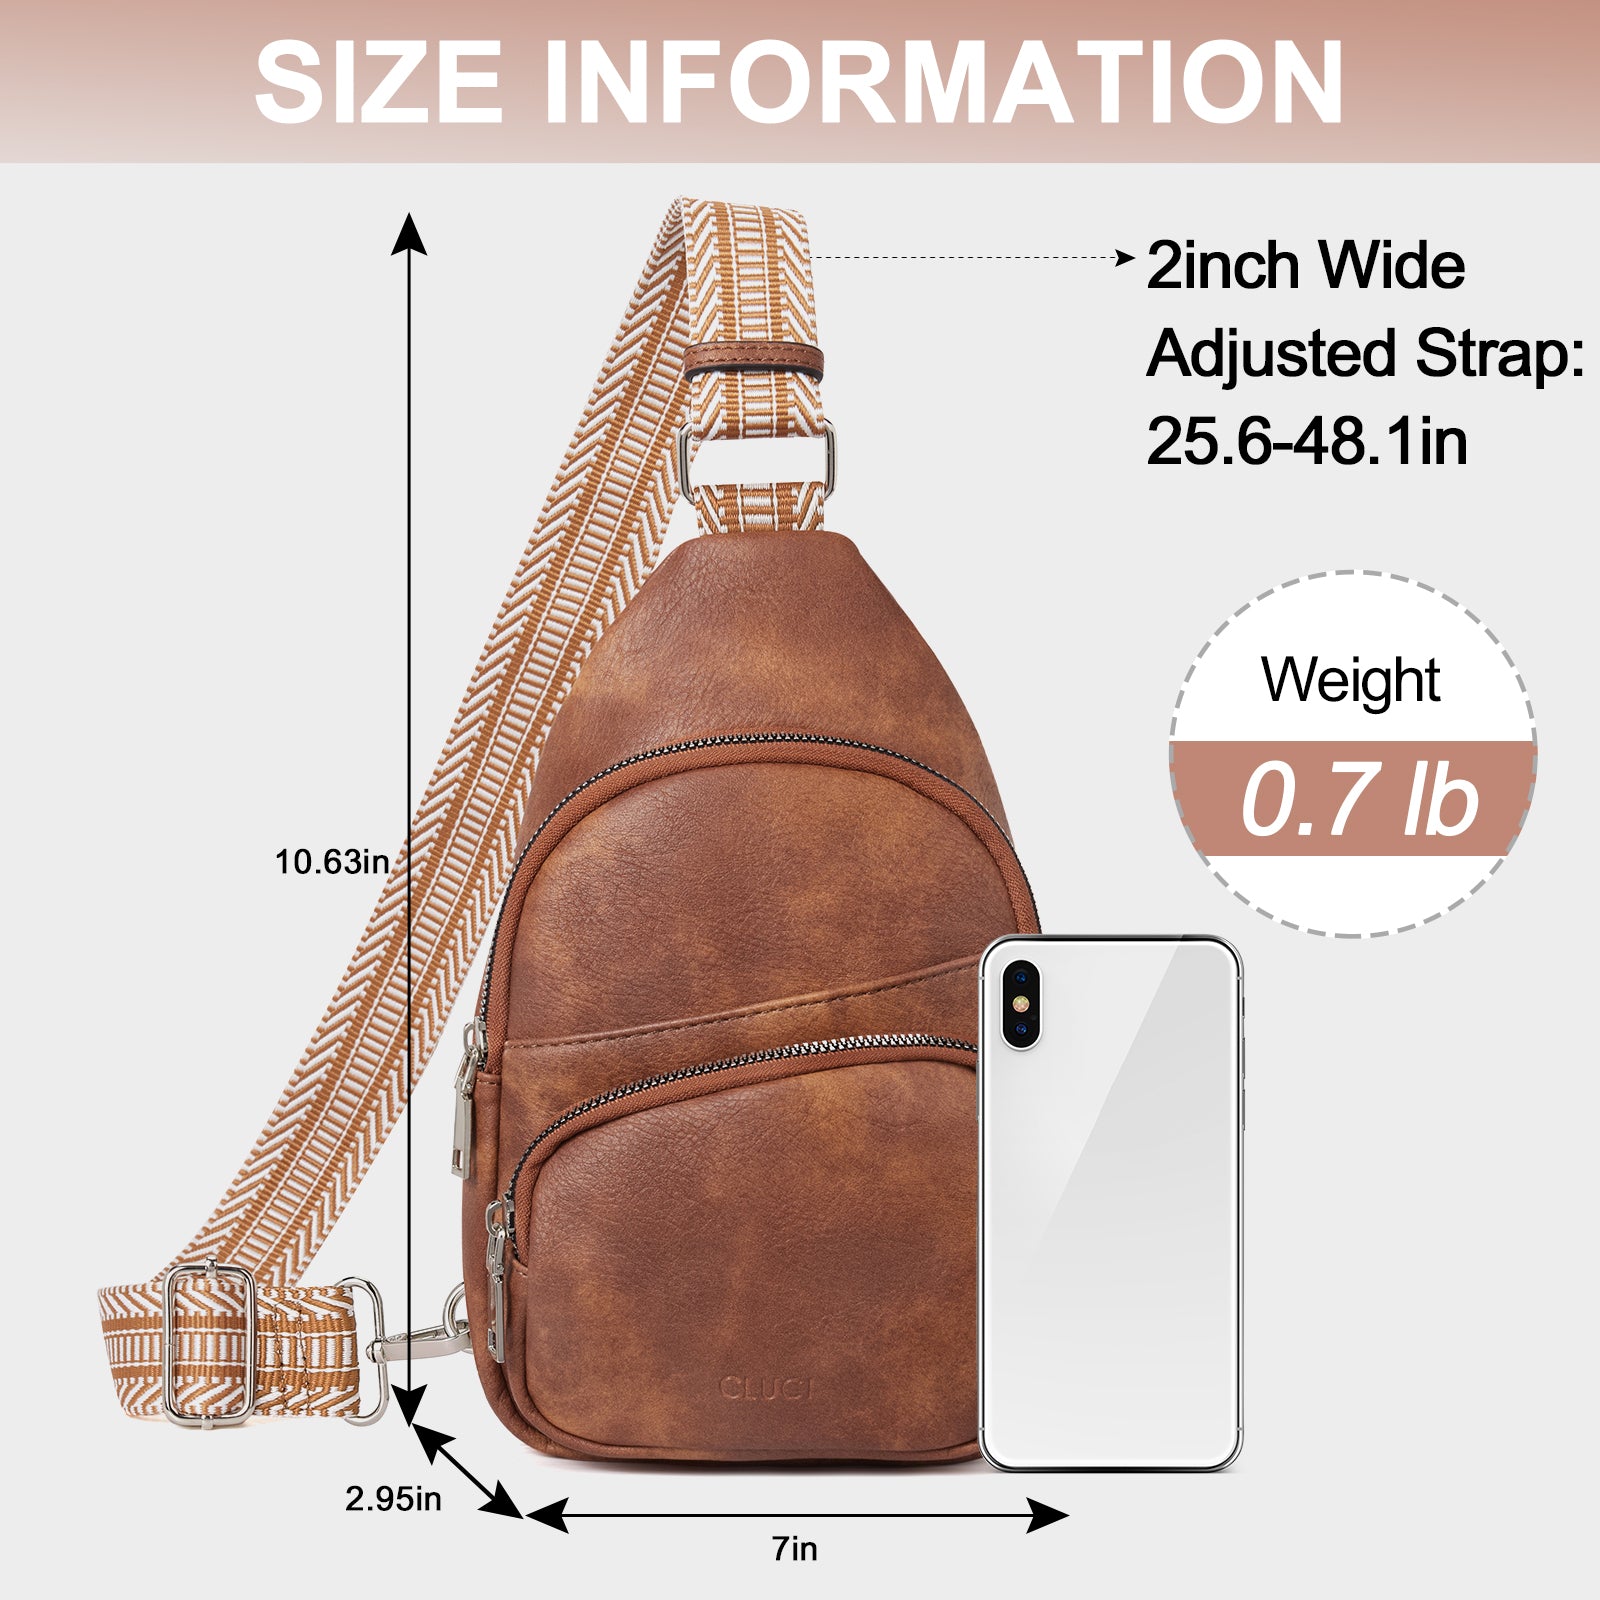 CLUCI Vegan Leather Sling Bag for Women Fanny Pack Crossbody Bags Chest Bag With Guitar Strap